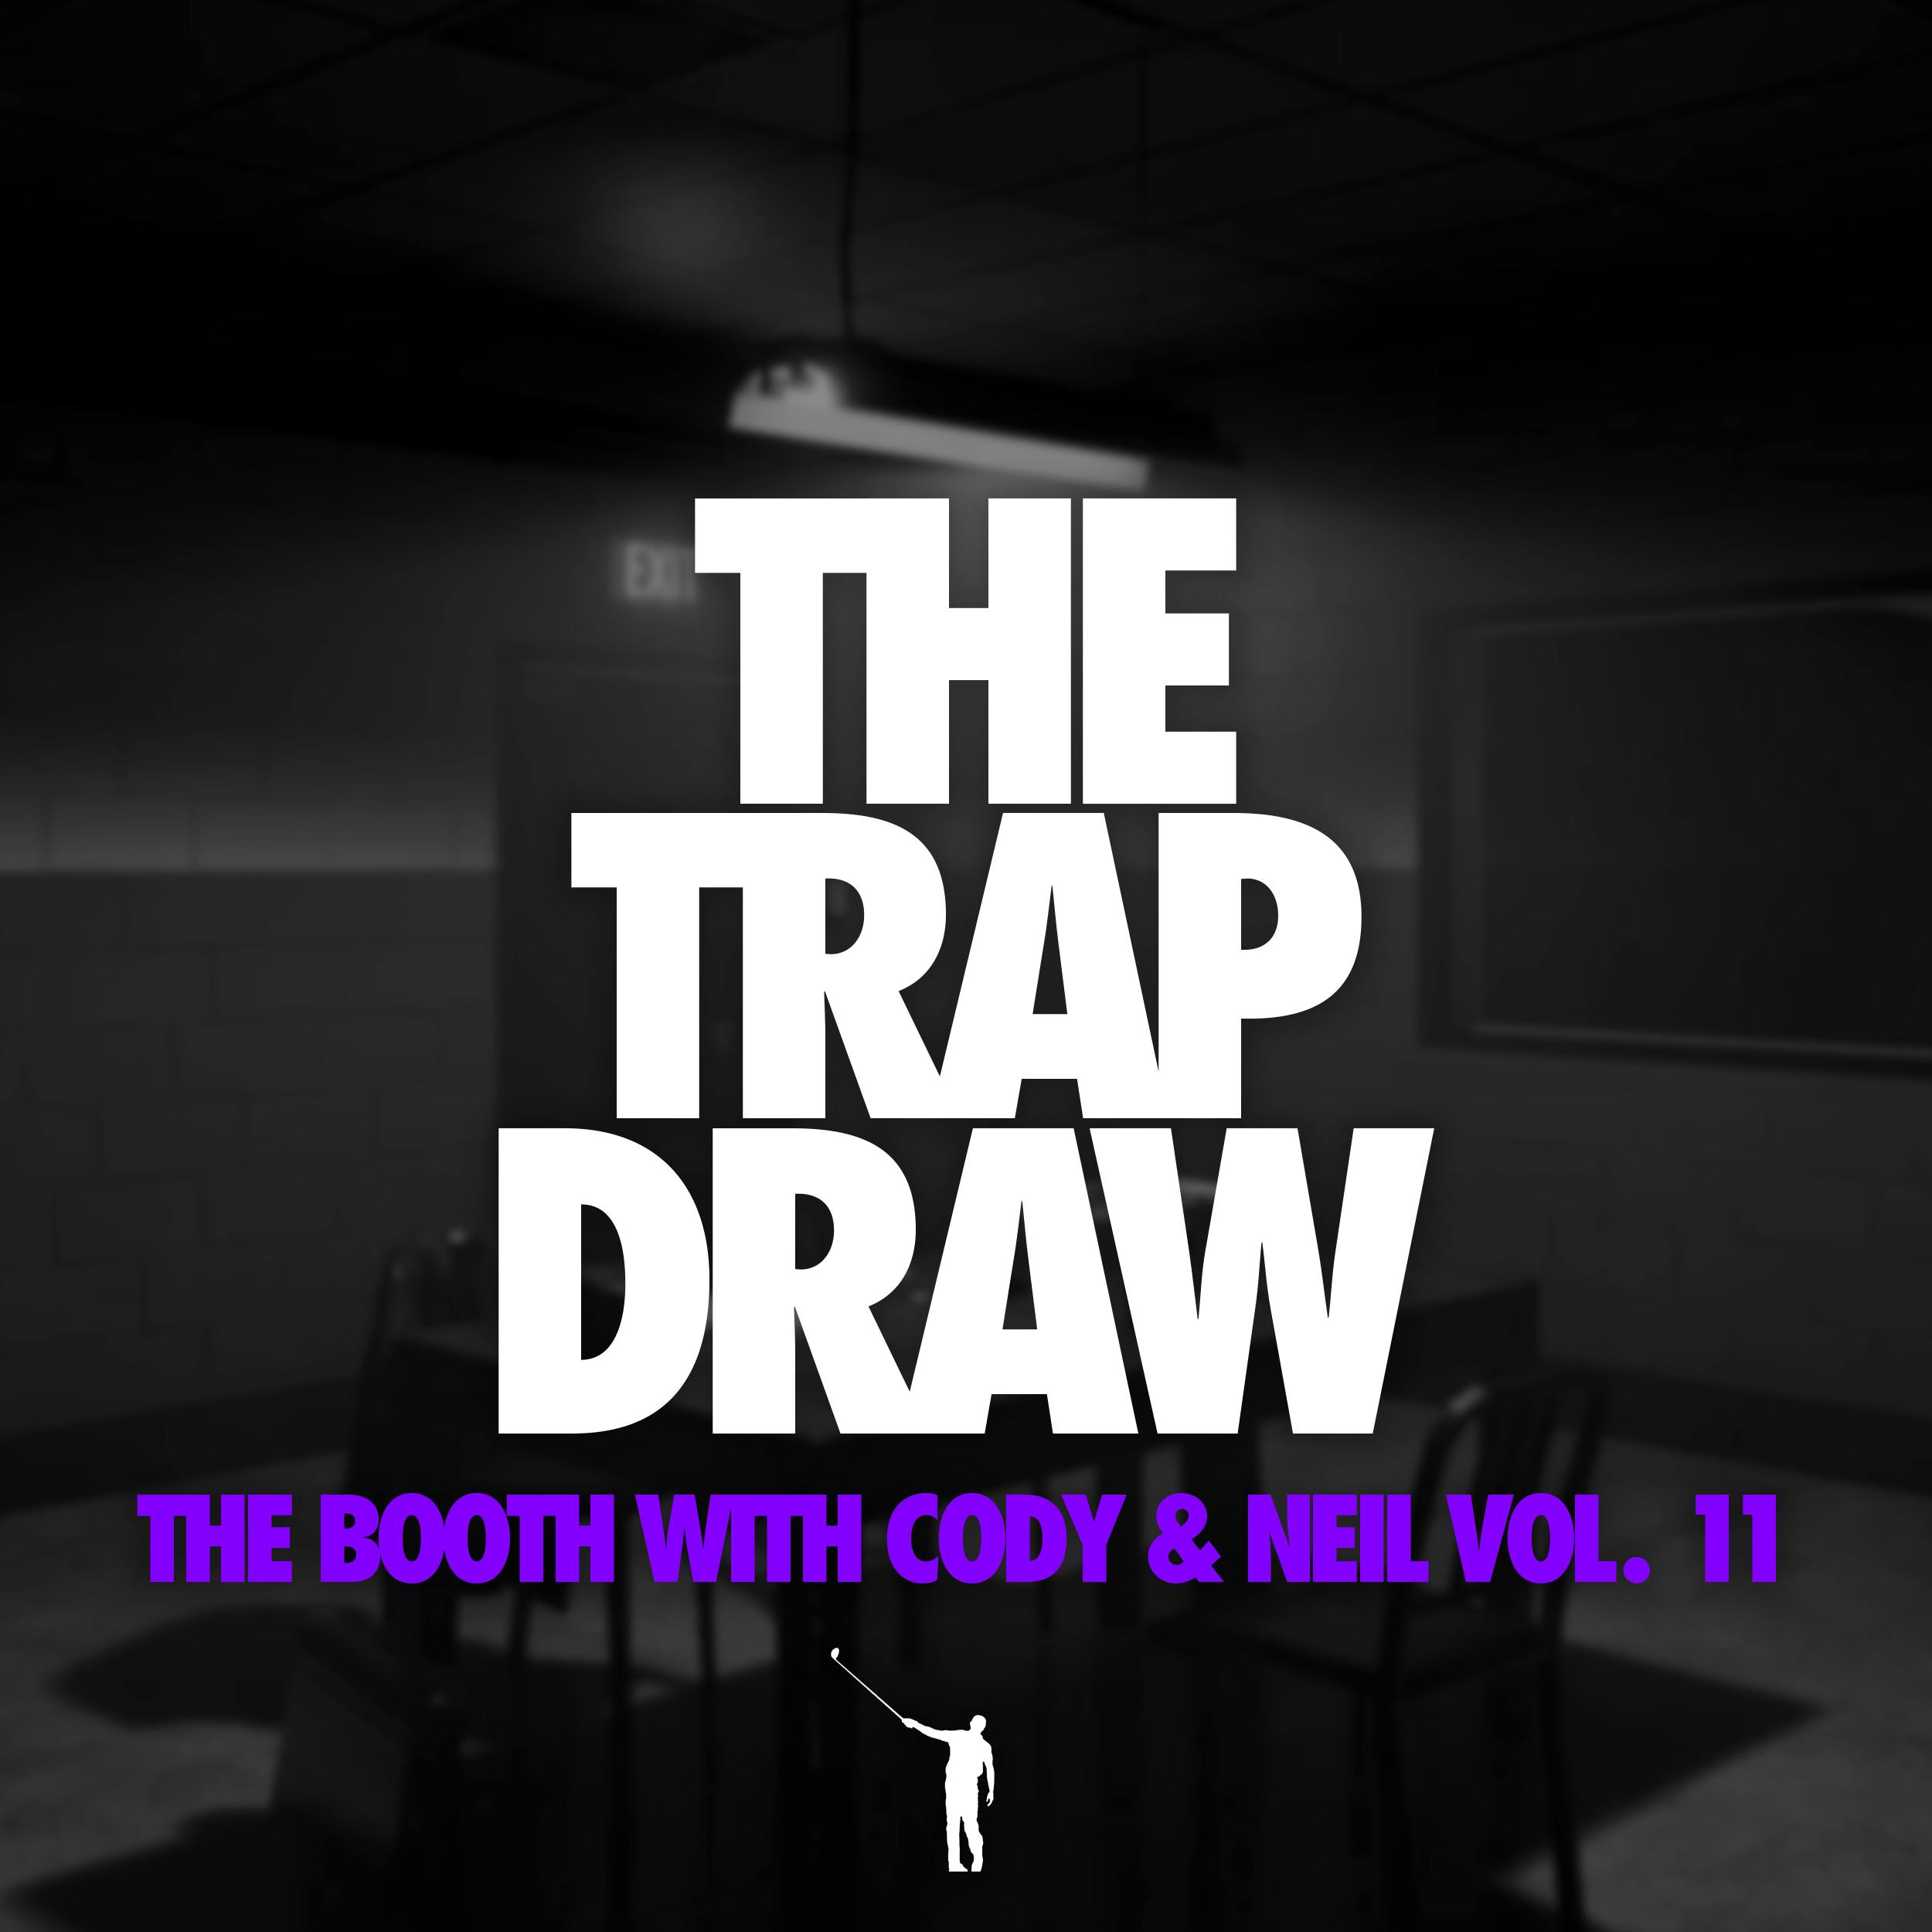 275: The Booth Vol. 11